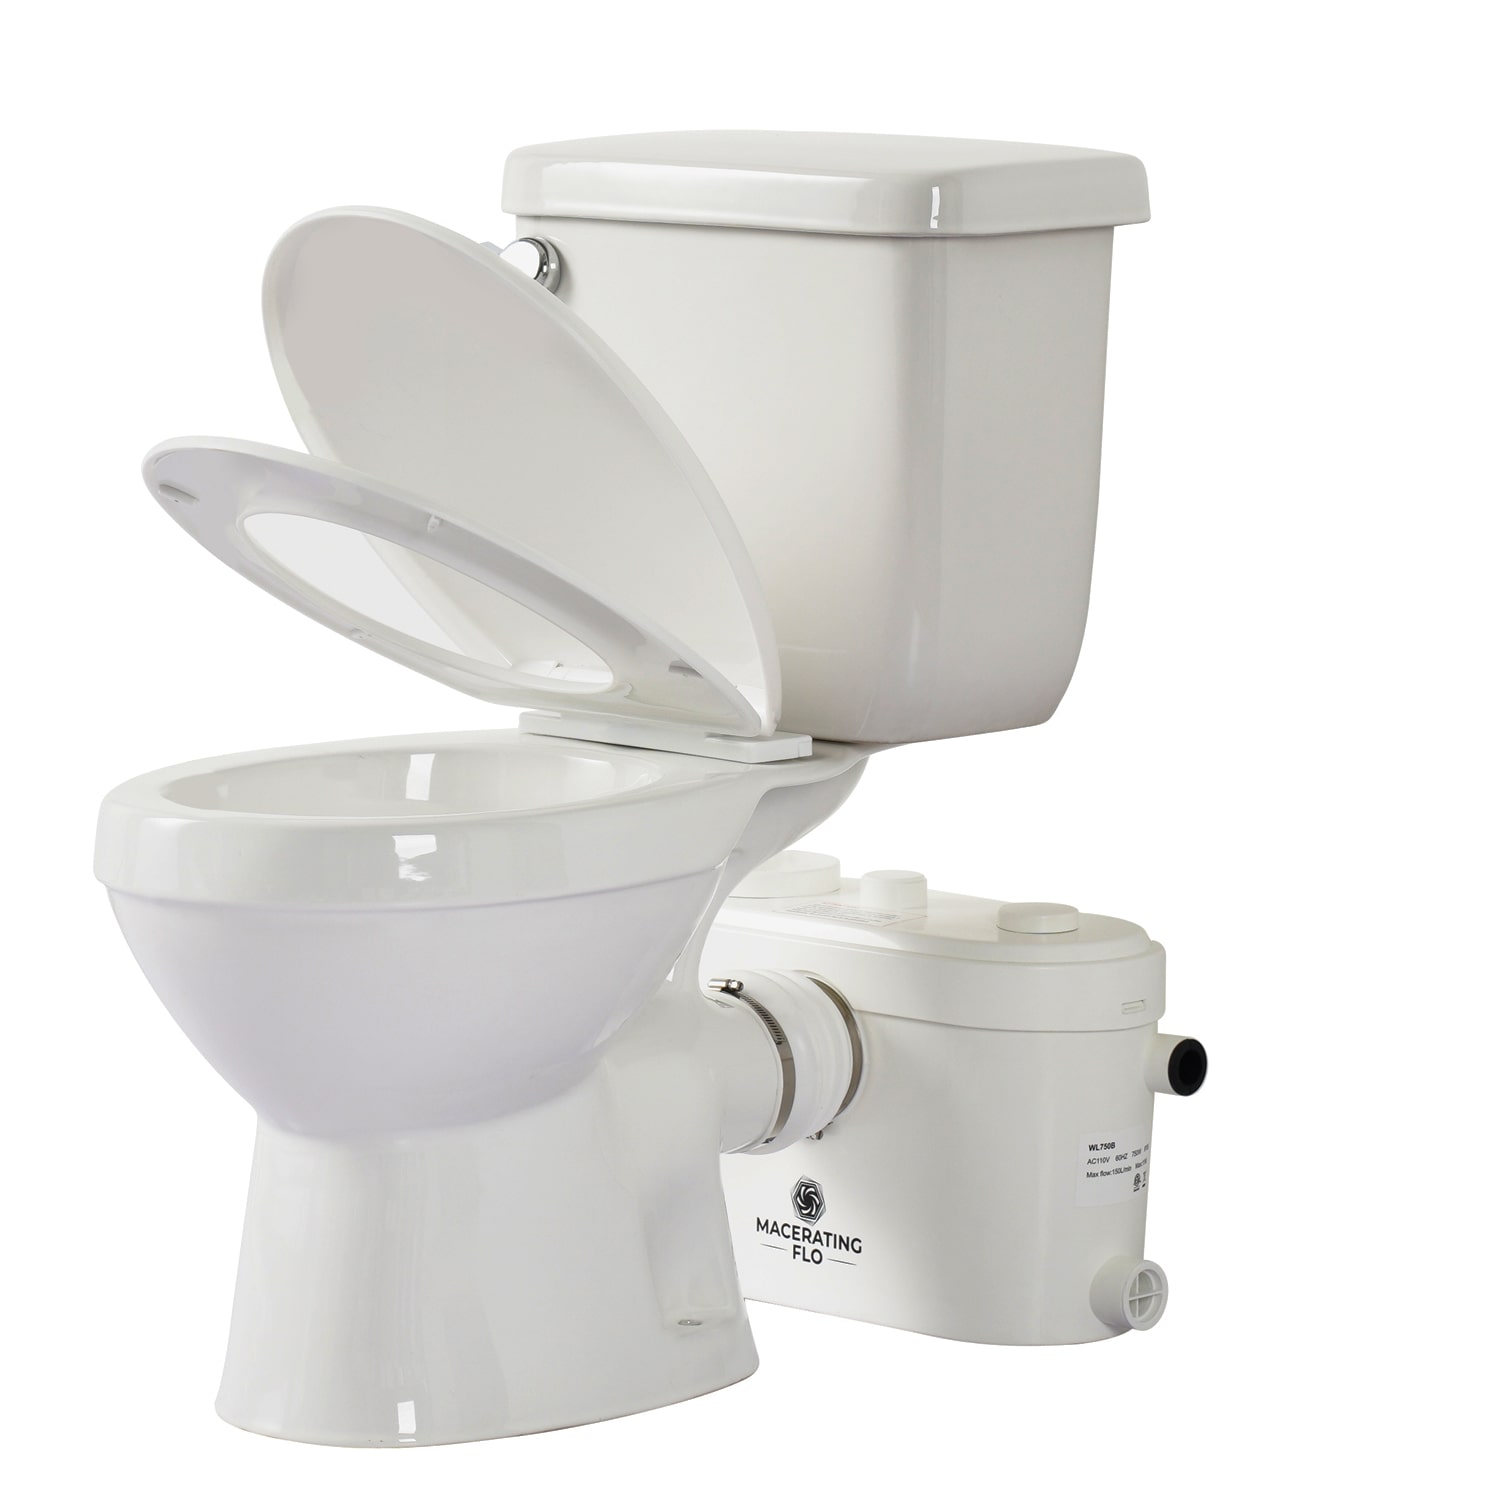 What is a macerator toilet and are they a good option for your